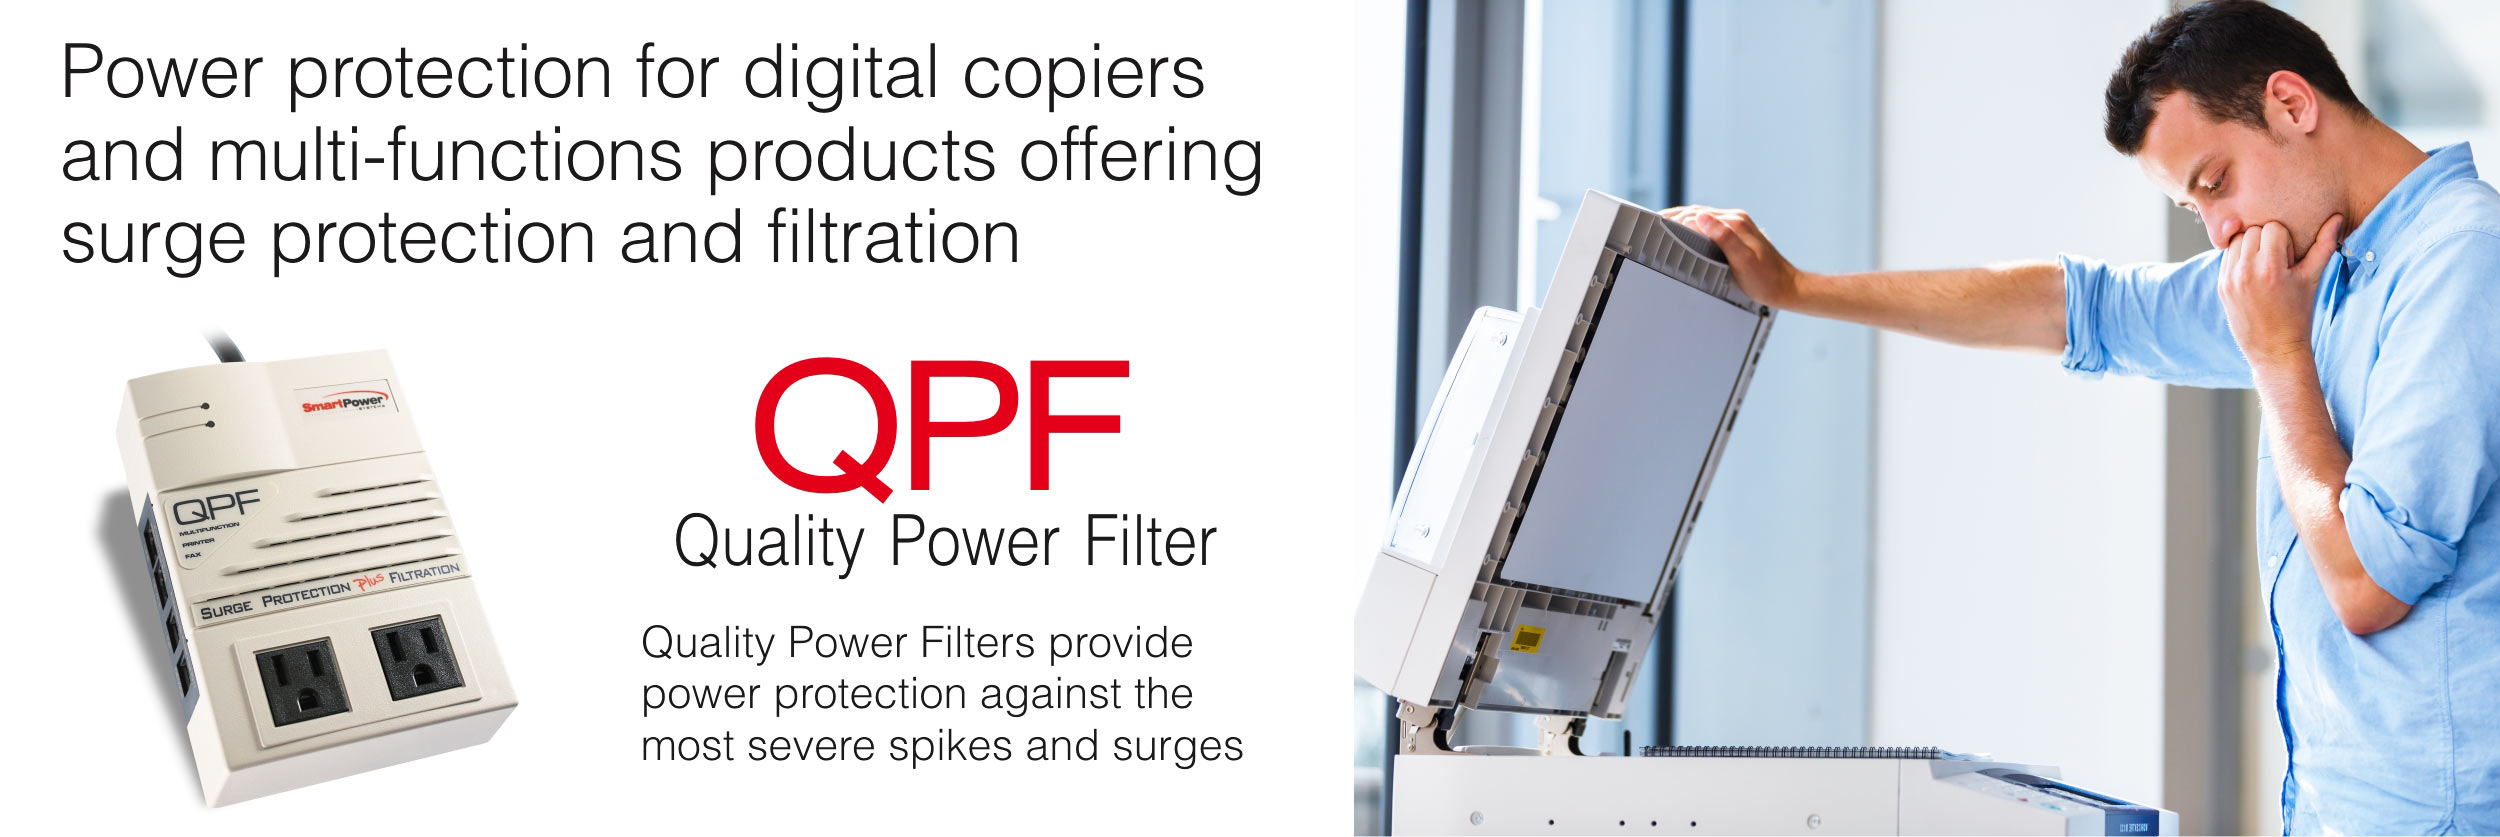 Quality Power Filters (QPF)